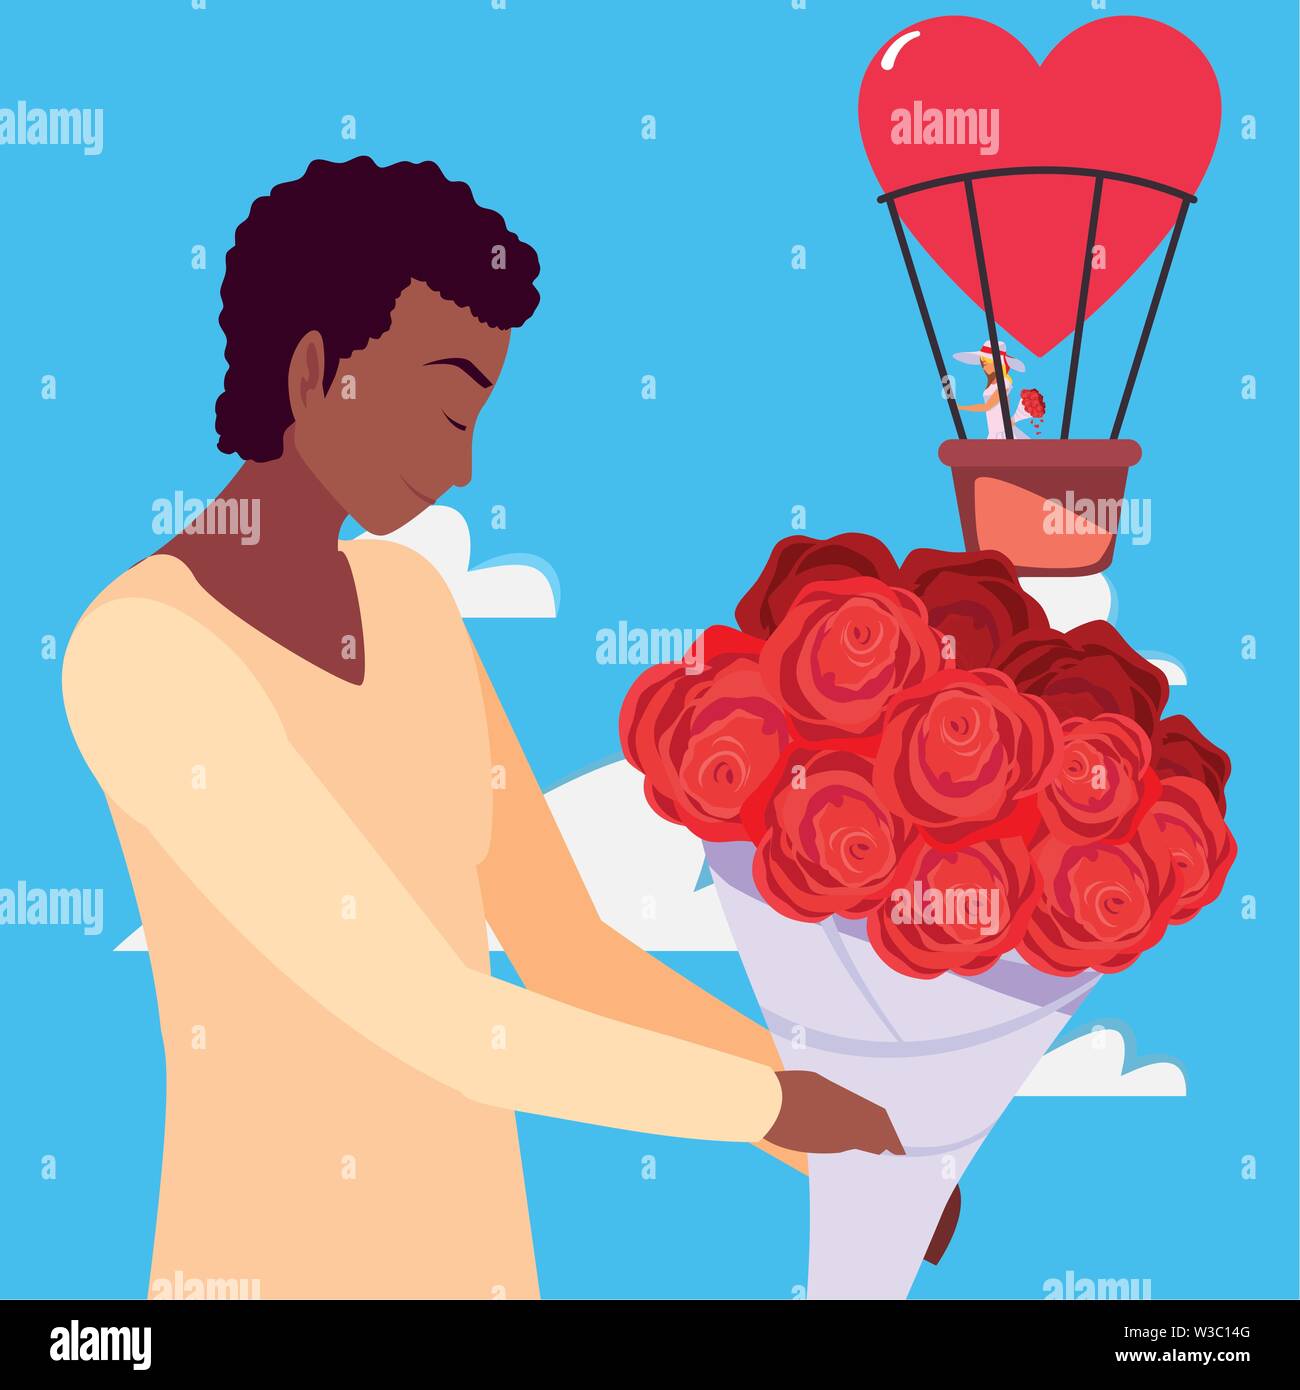 man with bouquet and woman on air balloon vector illustration Stock Vector